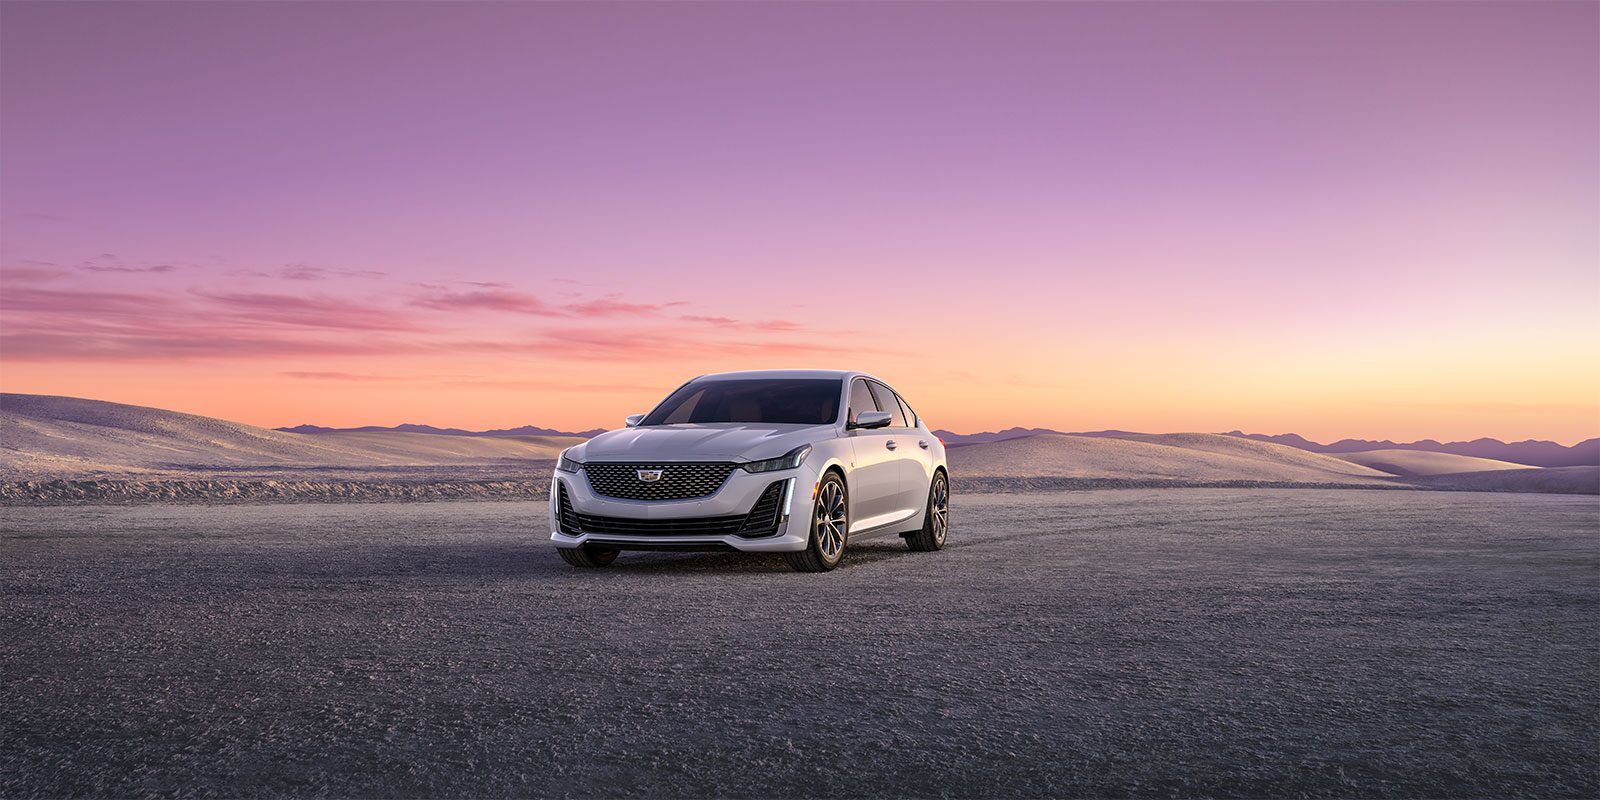 Front 3/4 view of 2023 Cadillac CT5 parked on desert land.